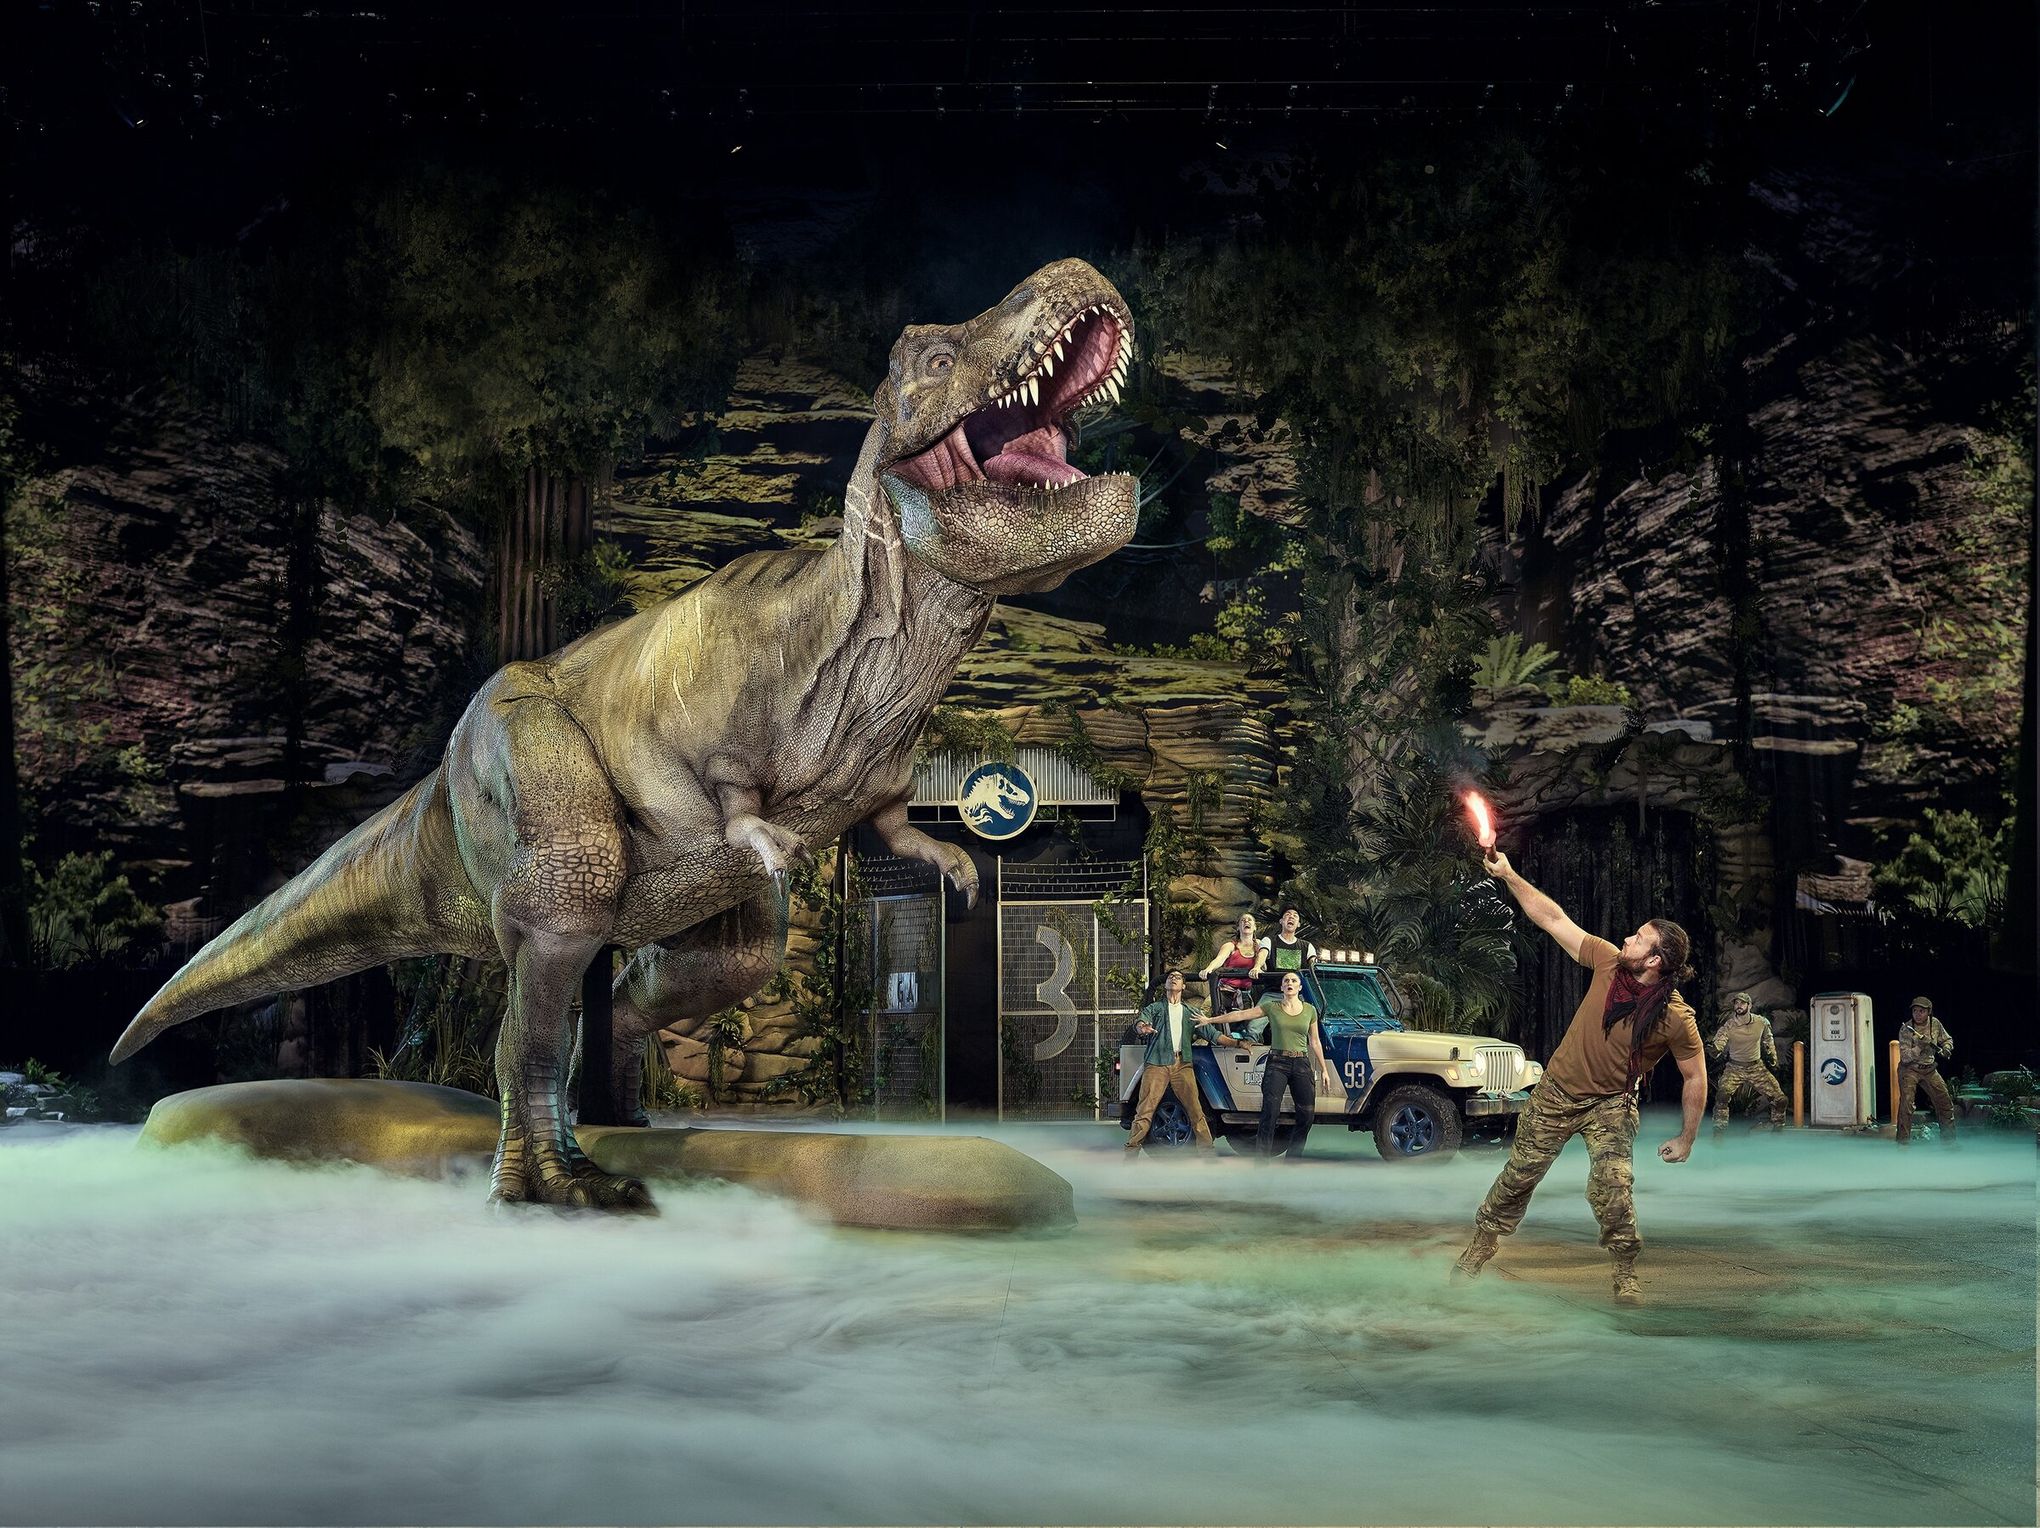 Jurassic World Live Tour is coming to Seattle: Is it worth going